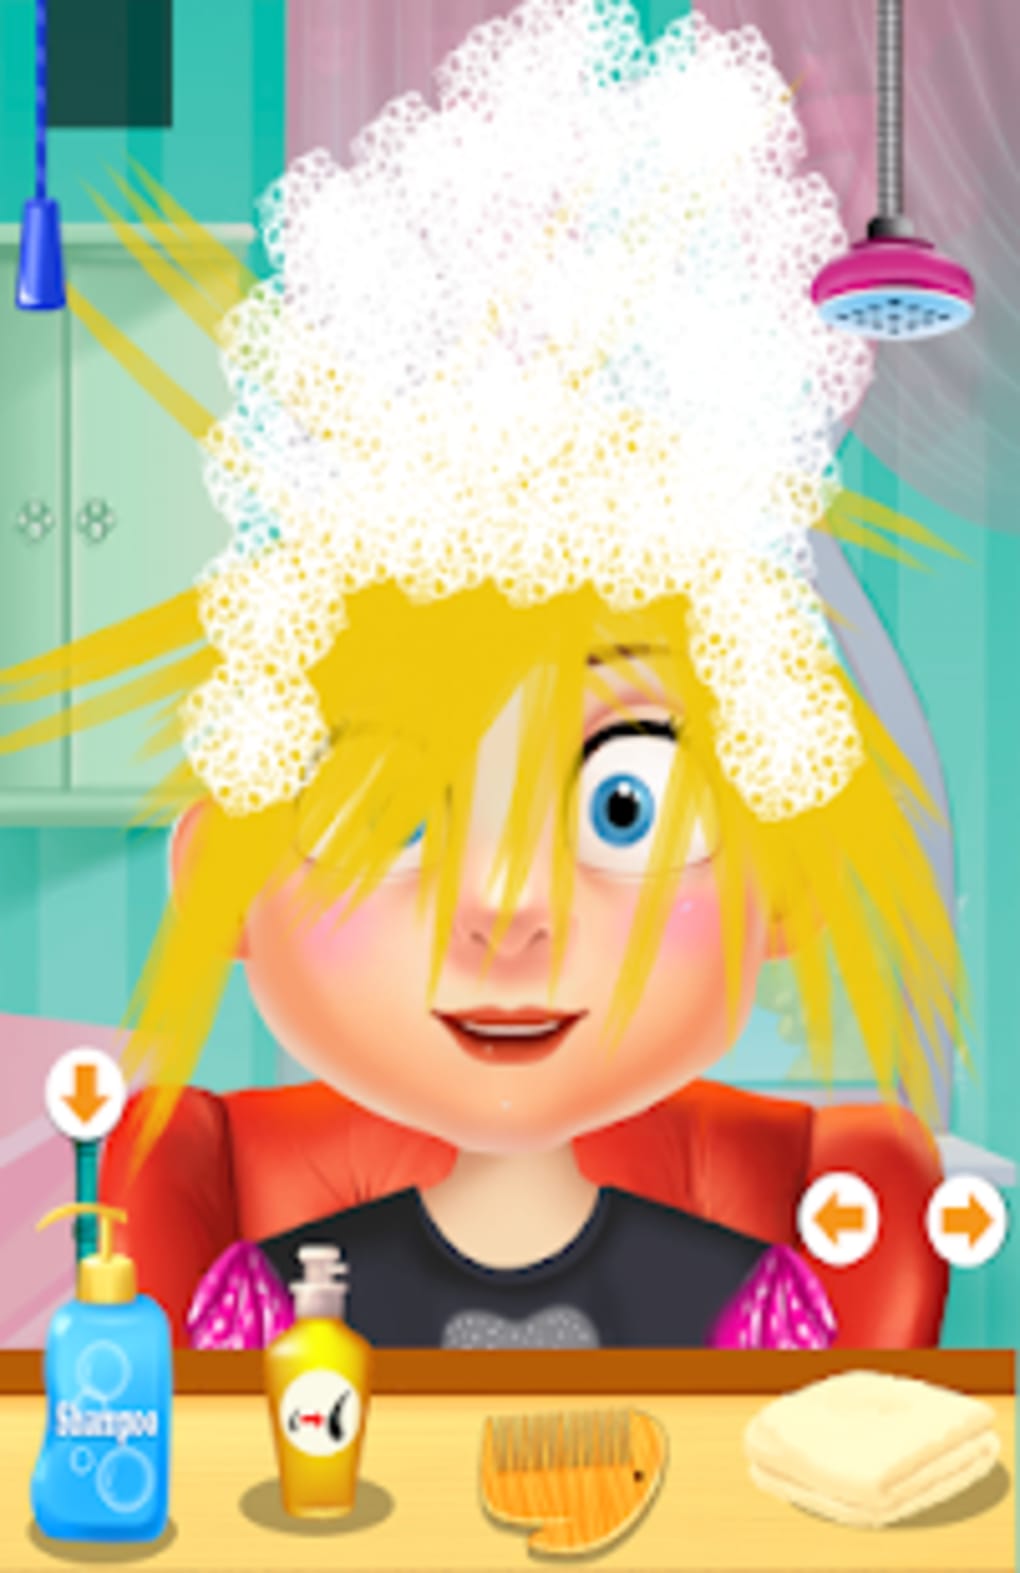 The Best Hairstyle For Your Doll's Face - Fun Stuff Blog - My Games 4 Girls